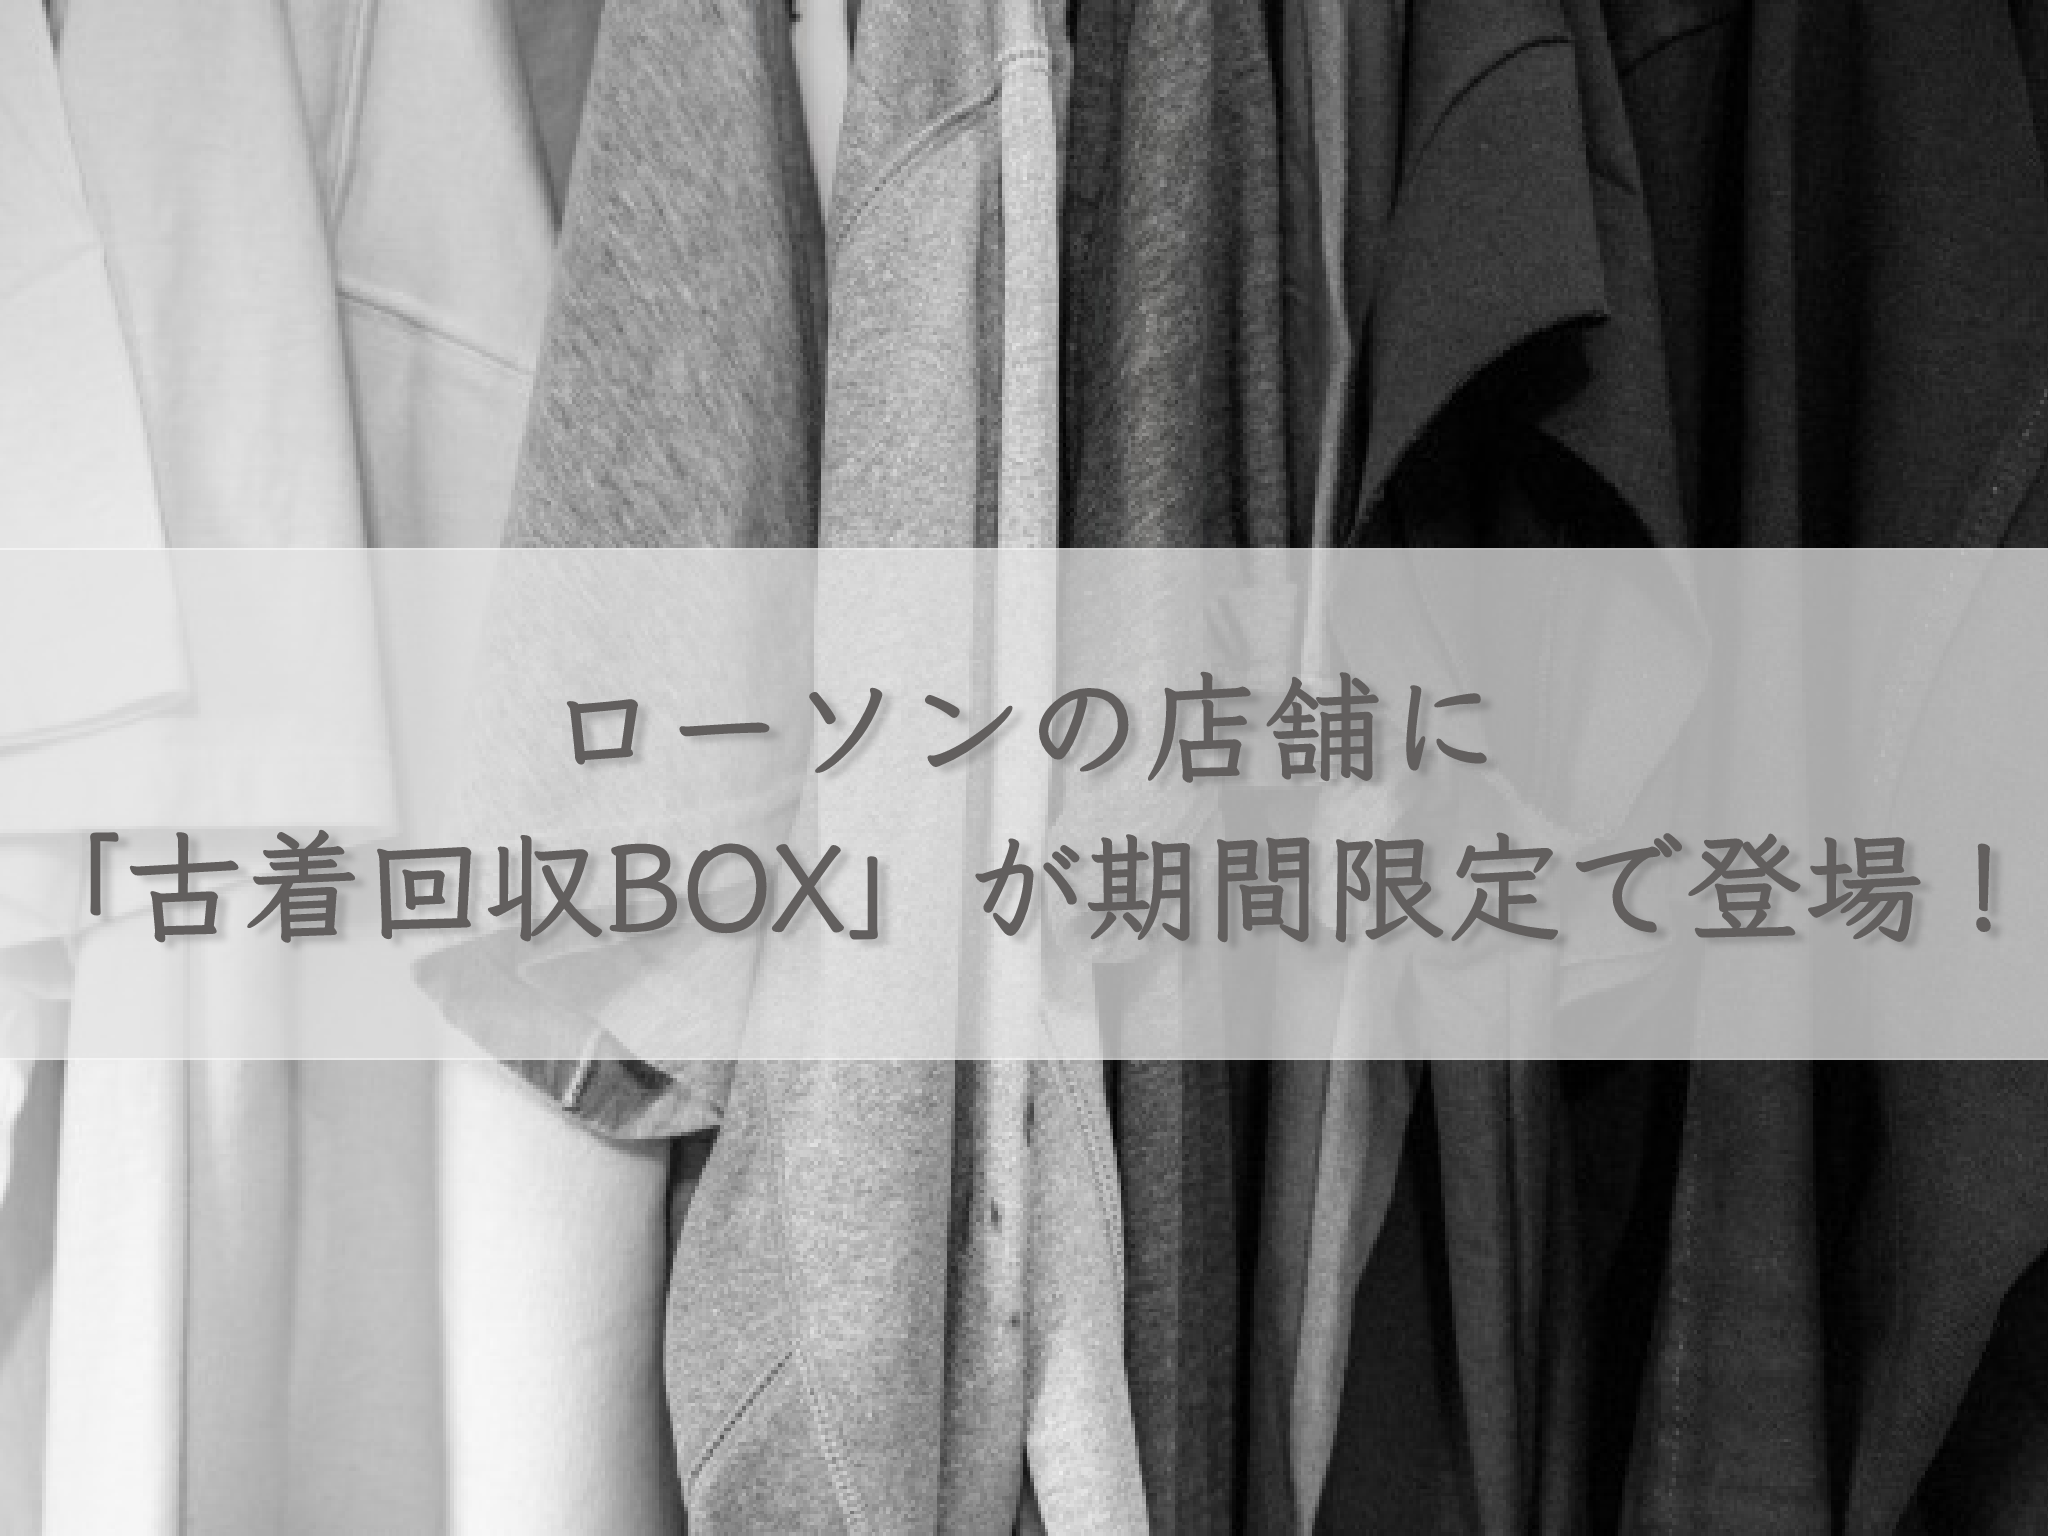 used-clothes-collection-box-appears-for-a-limited-time-at-lawson-stores